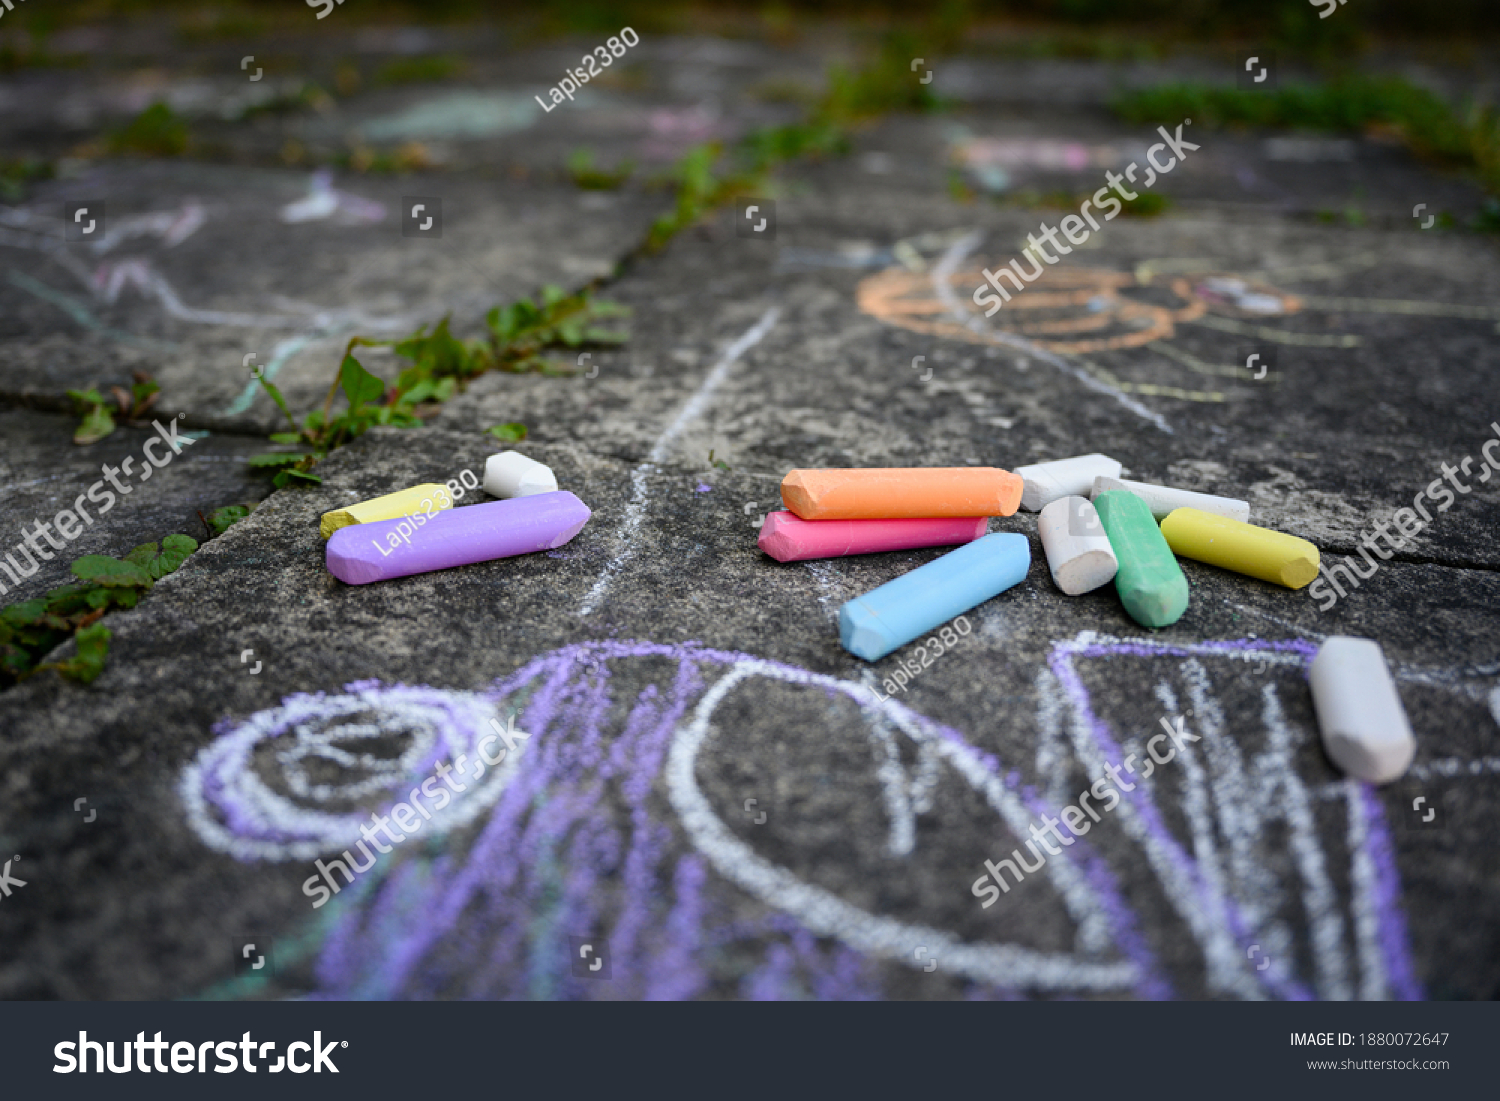 Children's drawing and colored chalks on a tile. #1880072647